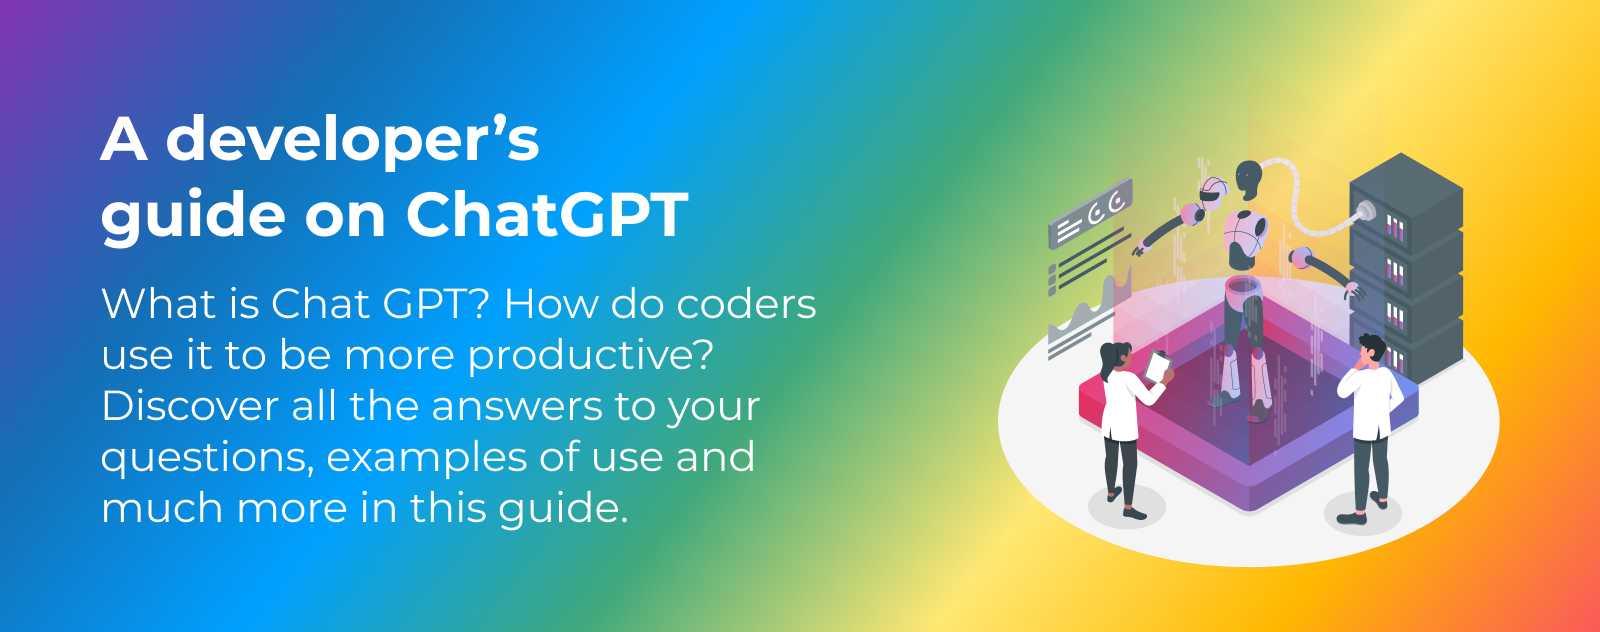 How to use ChatGPT? A developer's guide